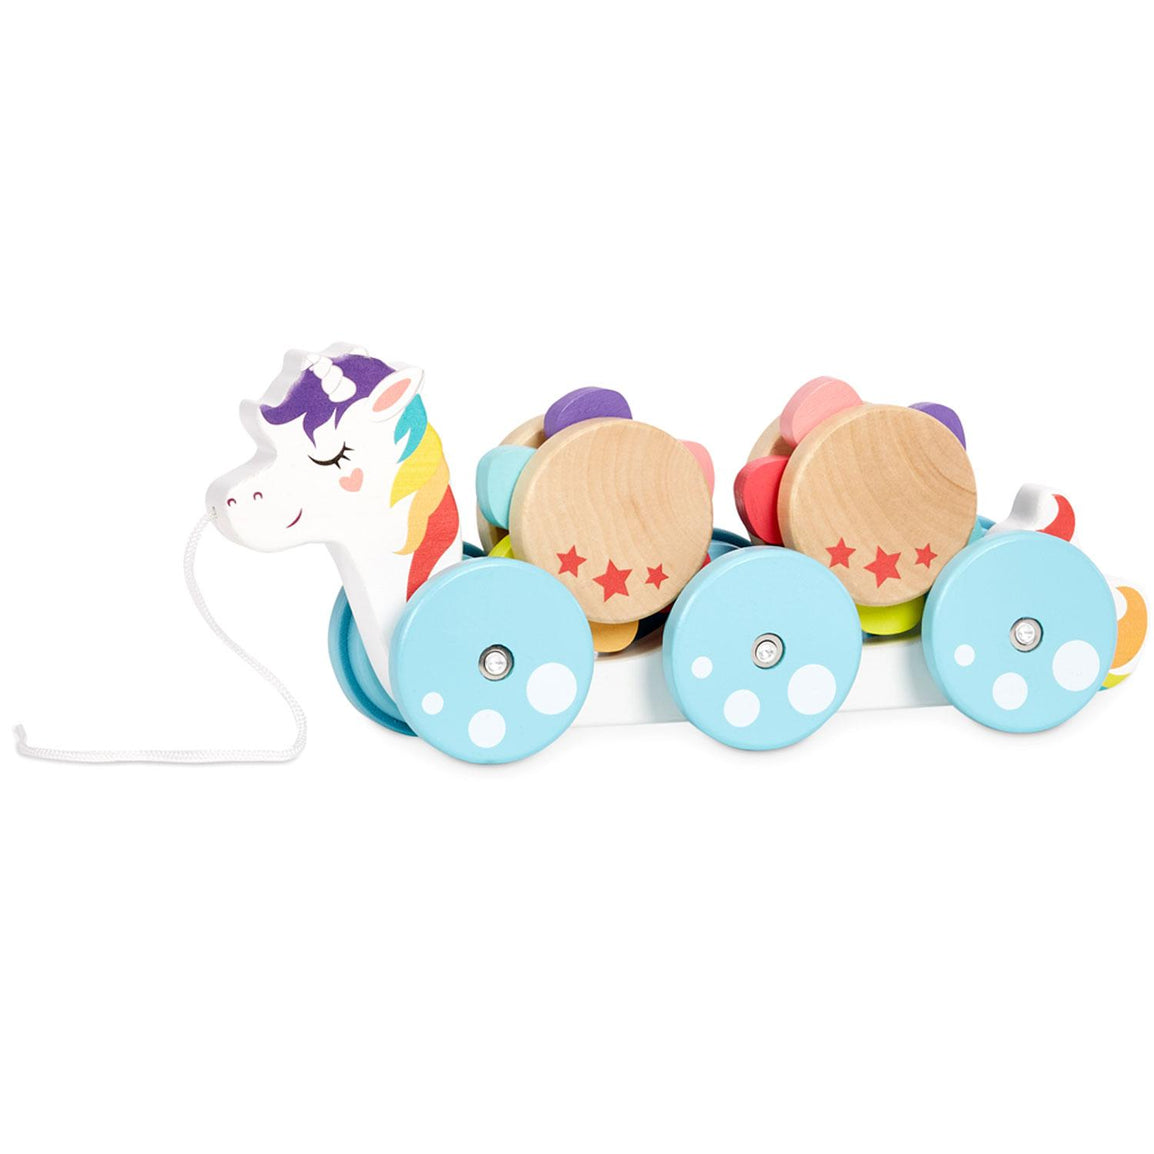 Wooden Critters Unicorn Pull Toy has six rolling wheels and two removable cargo pieces